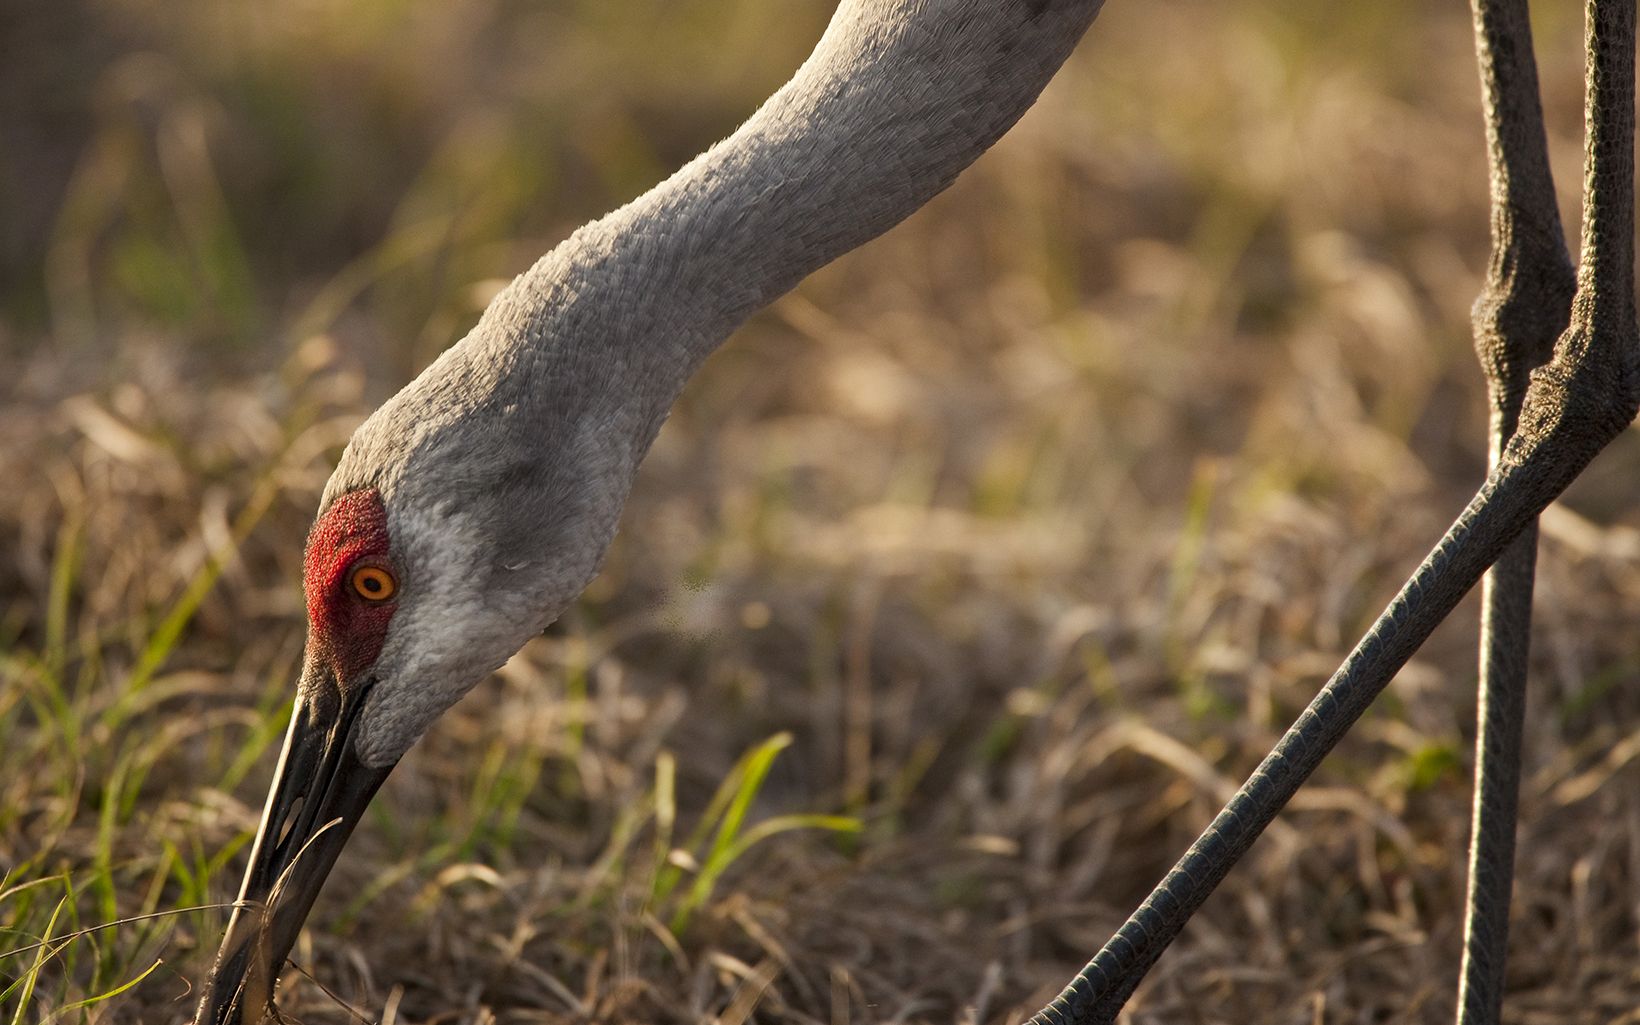 A sandhill crane forages for insects in the grass at Disney Wilderness Preserve.